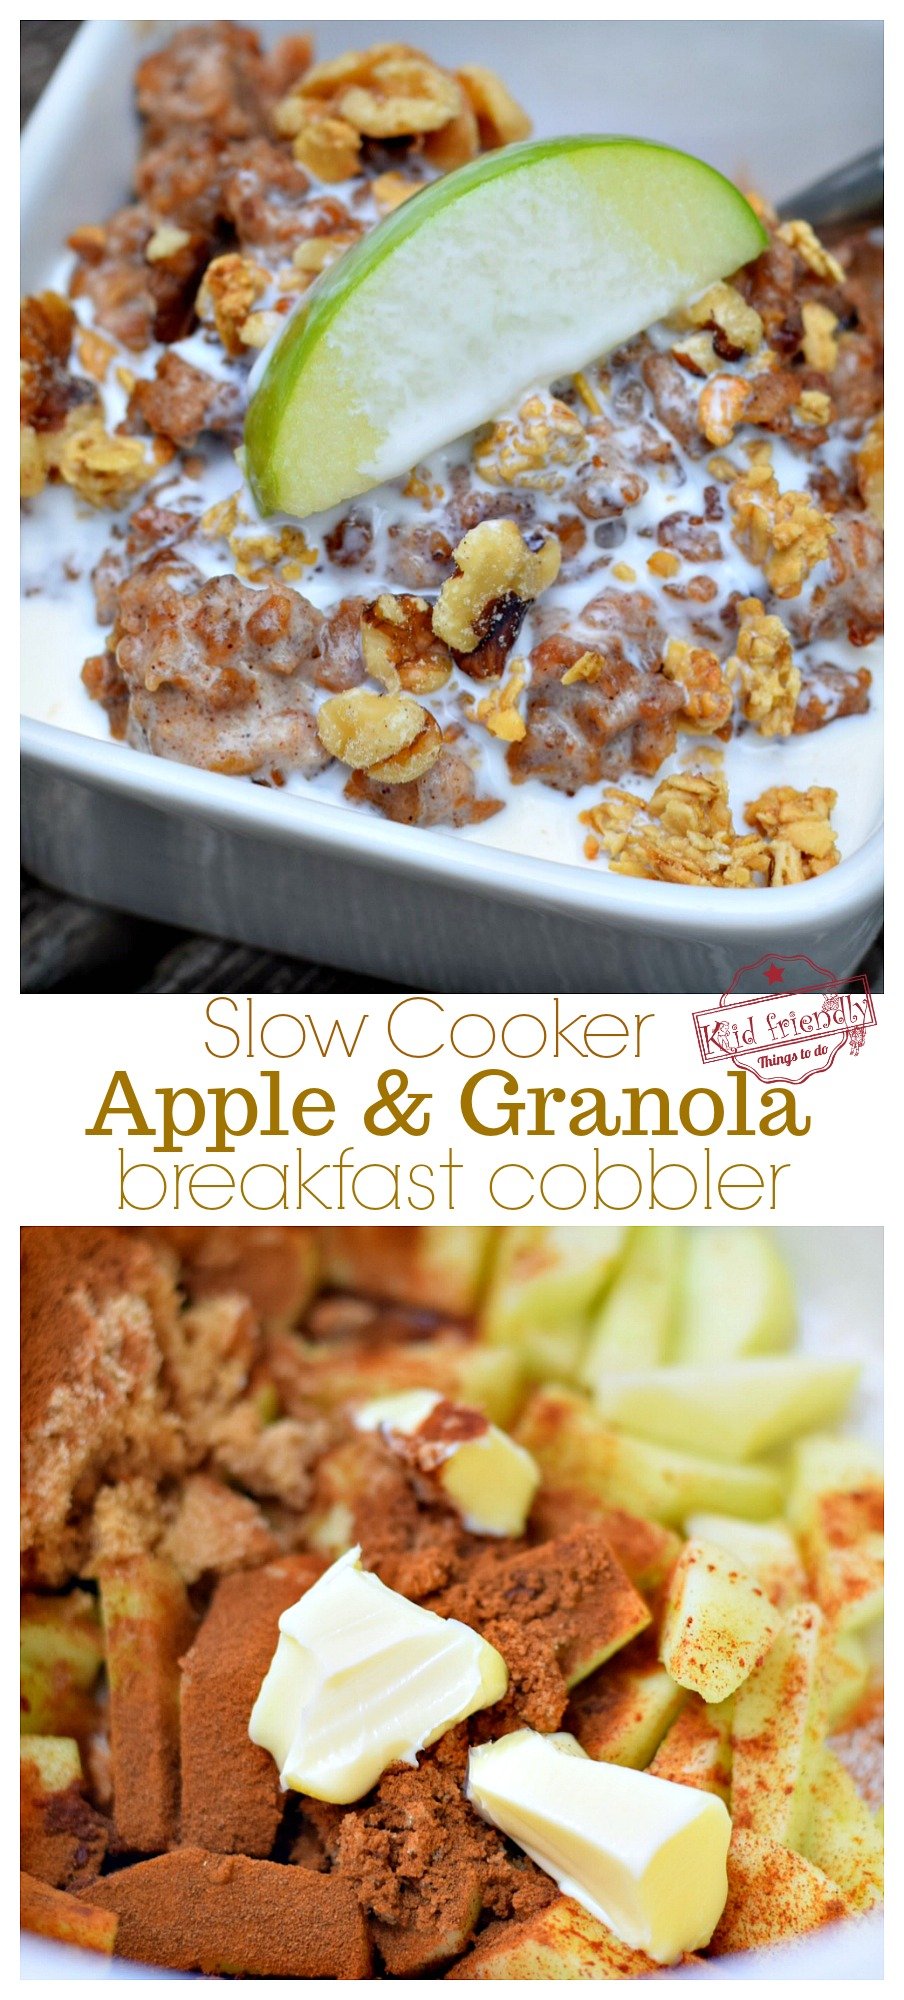 Slow Cooker Apple and Granola Breakfast Cobbler Recipe - Amazing overnight delicious and easy recipe that's healthy too! www.kidfriendlythingstodo.com